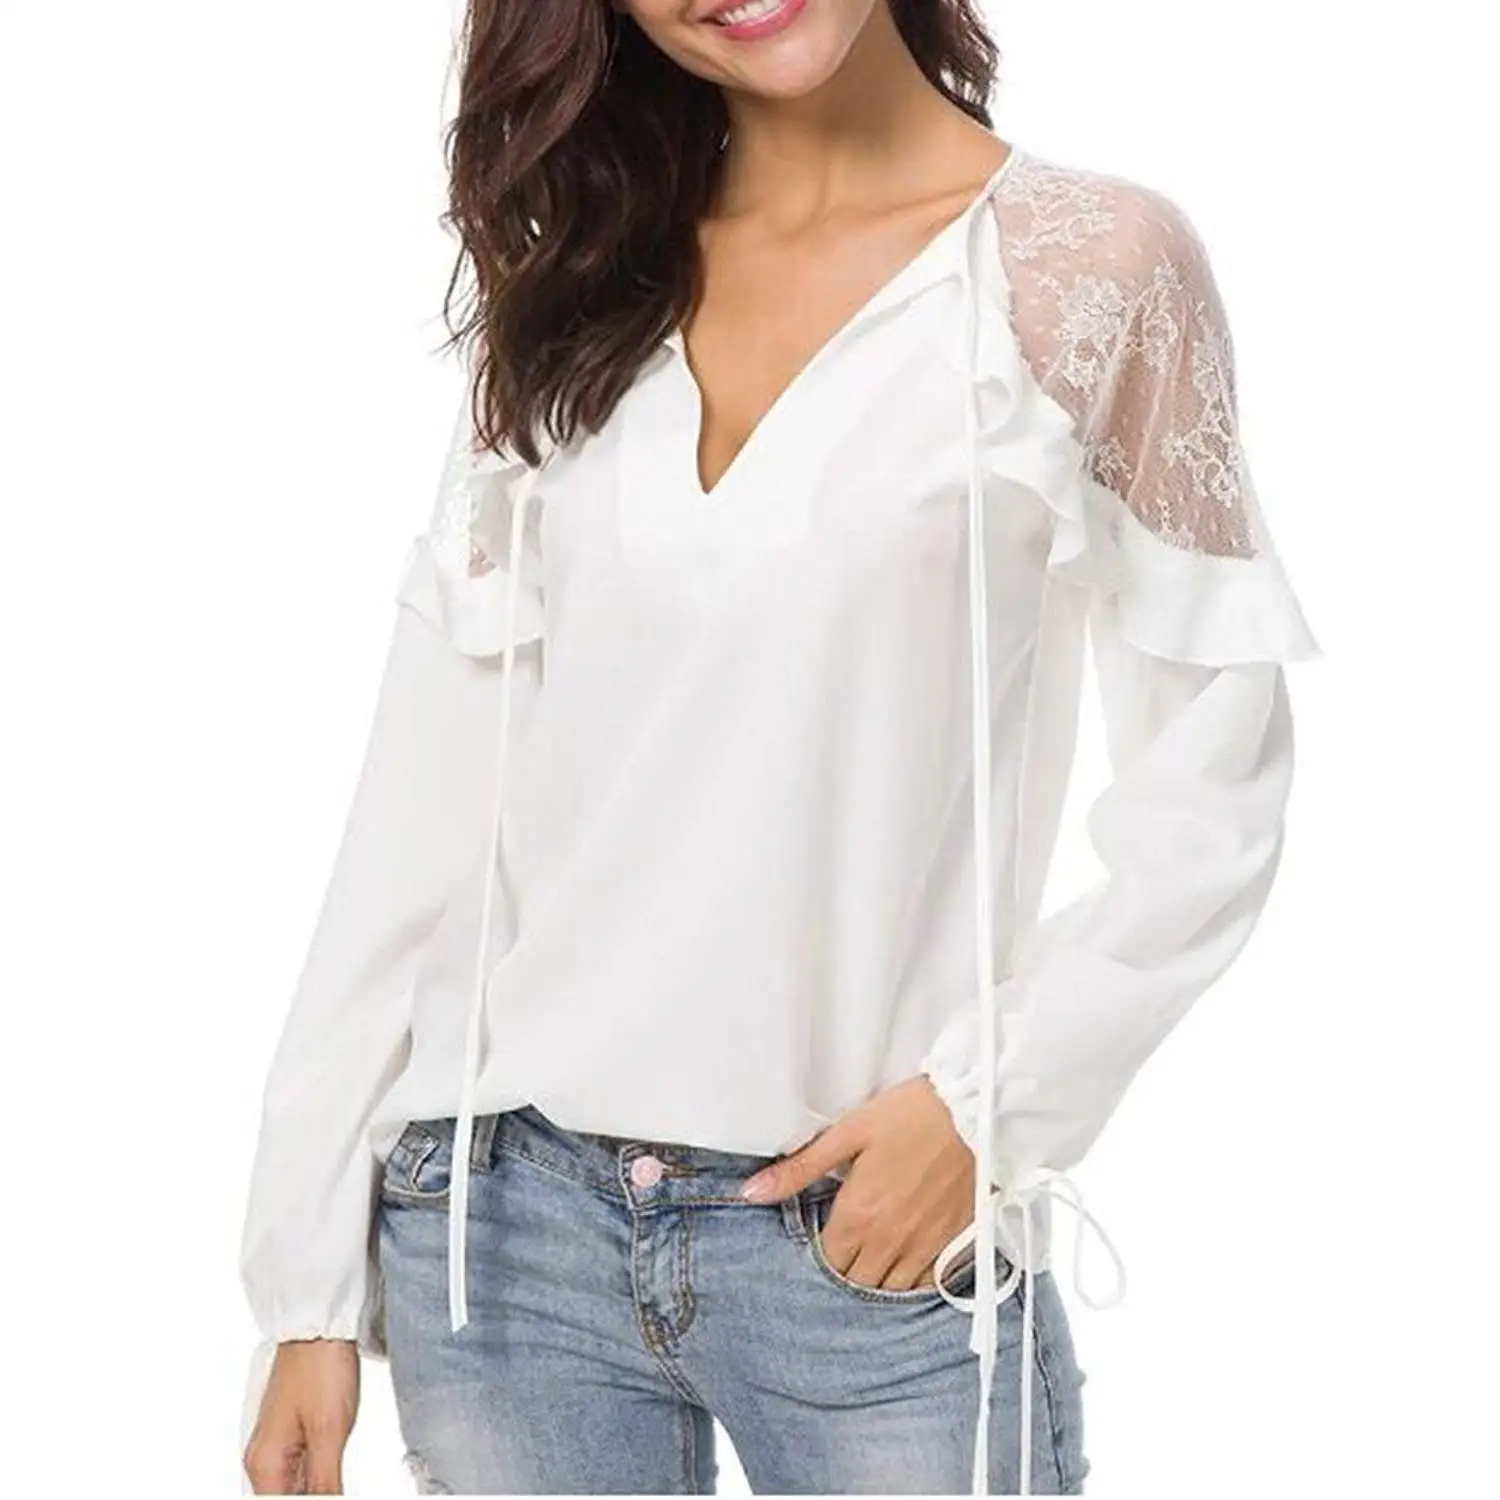 Cheap White Dressy Blouse, find White Dressy Blouse deals on line at